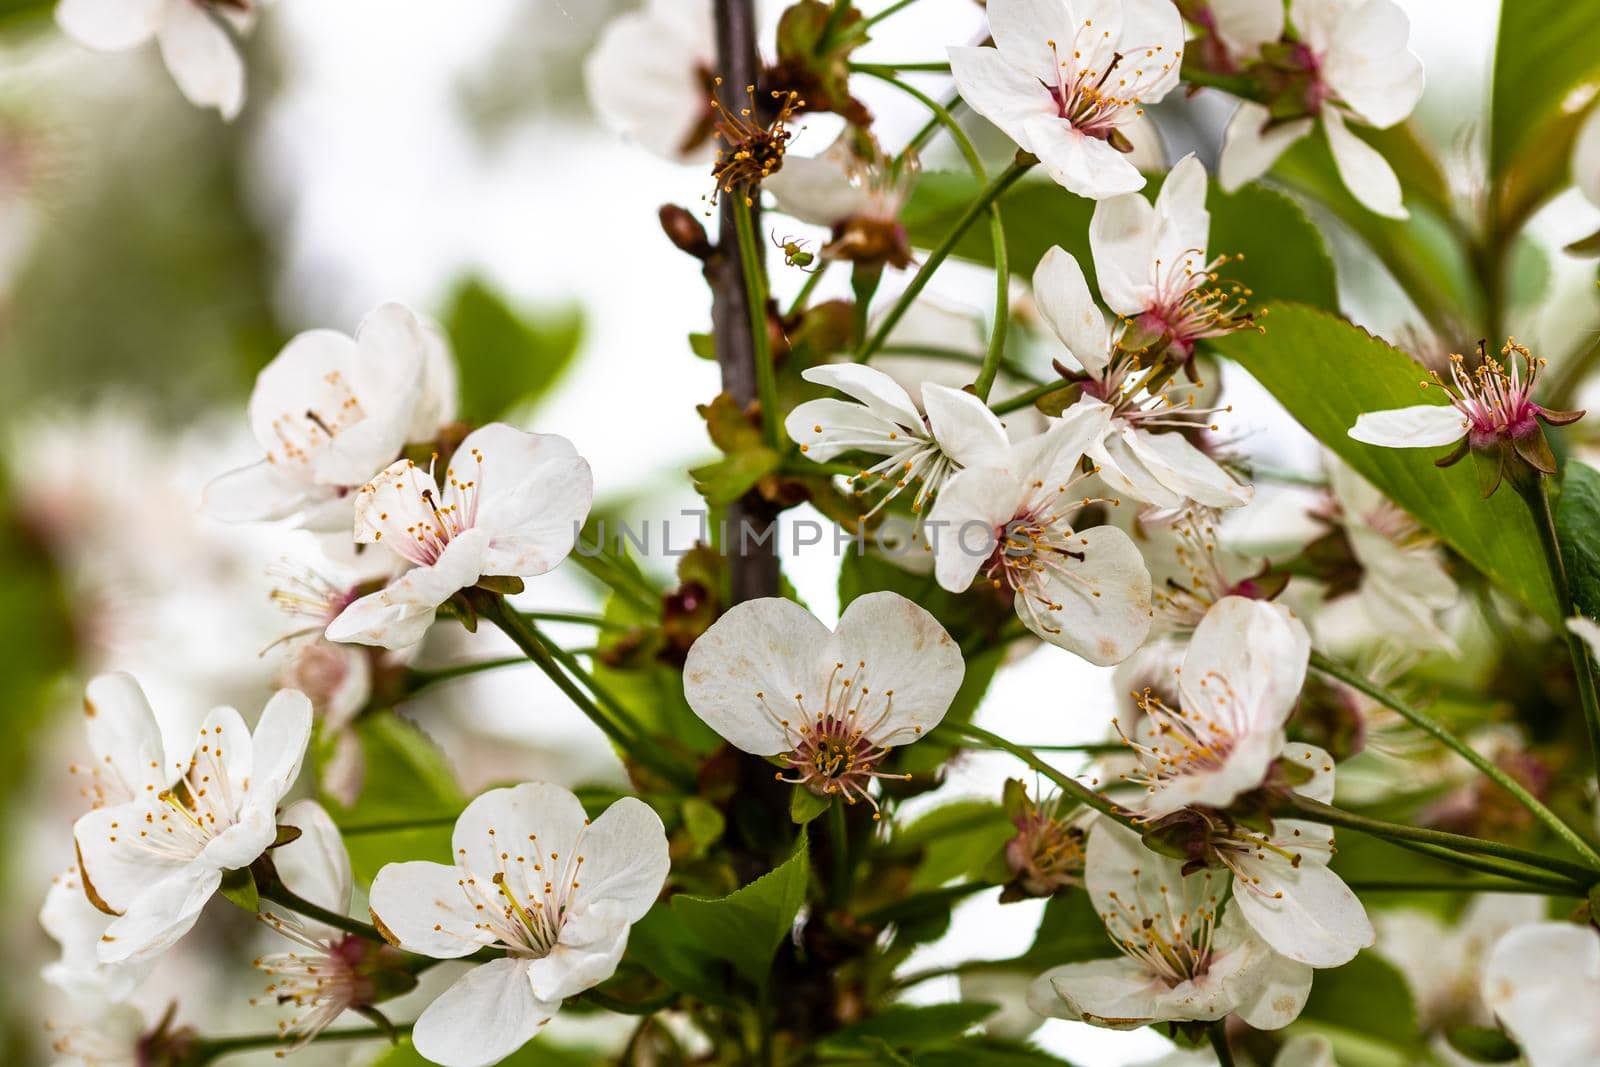 Spring flowering trees with white flowers in the garden. Spring background and blossom tree